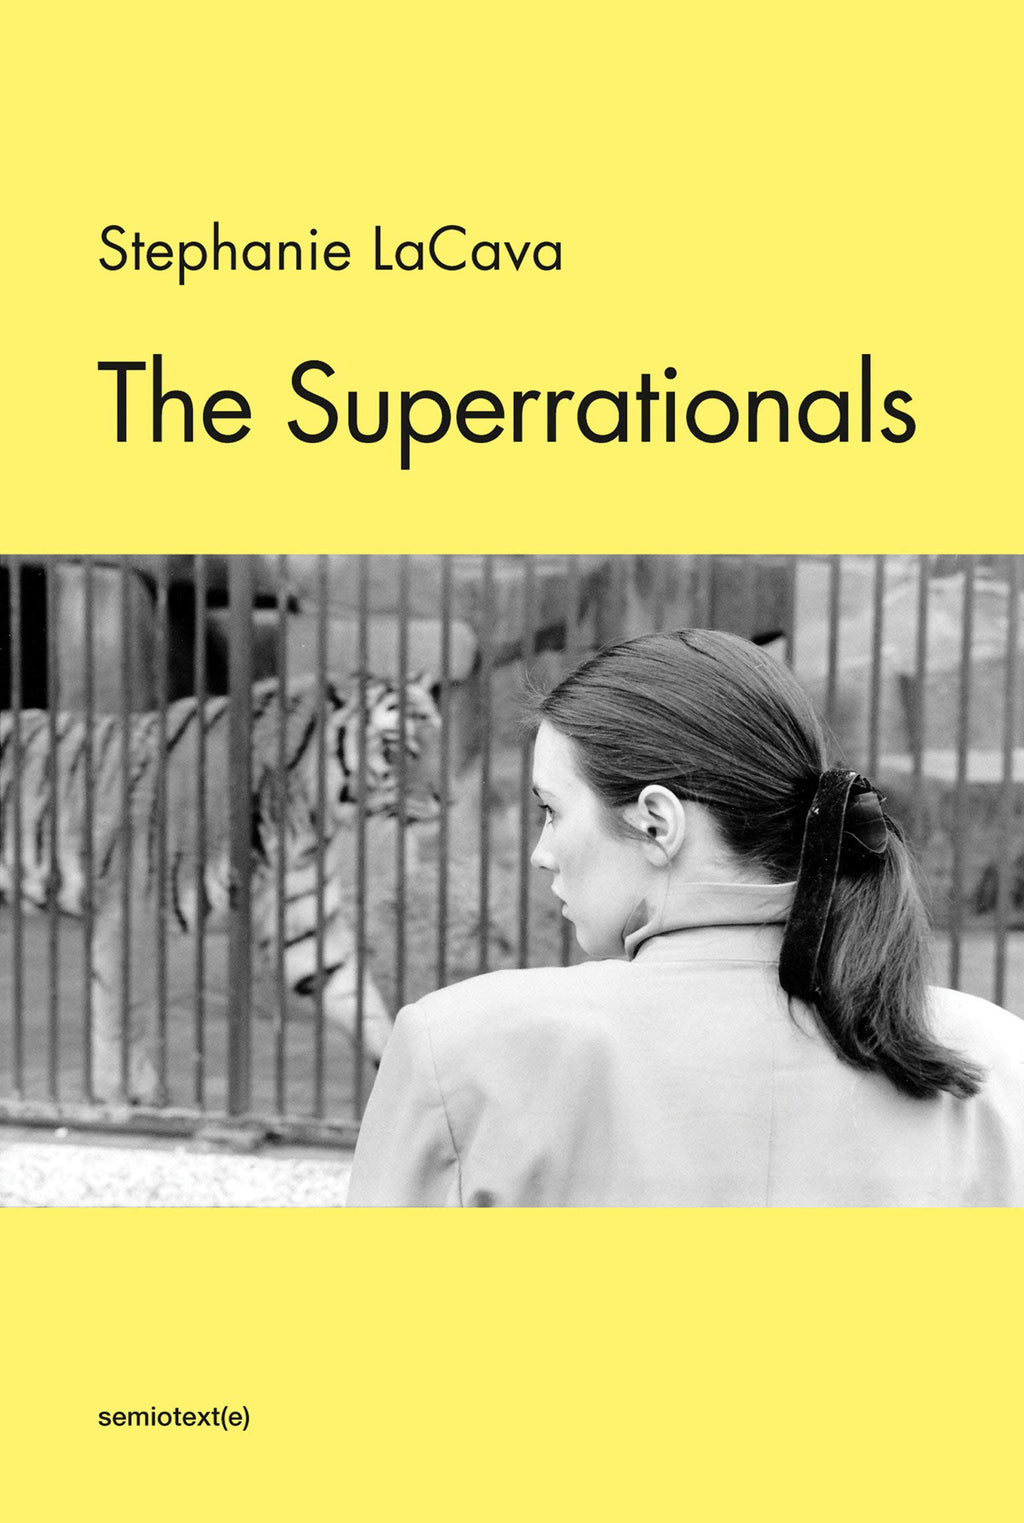 The Superrationals by Stephanie Lacava